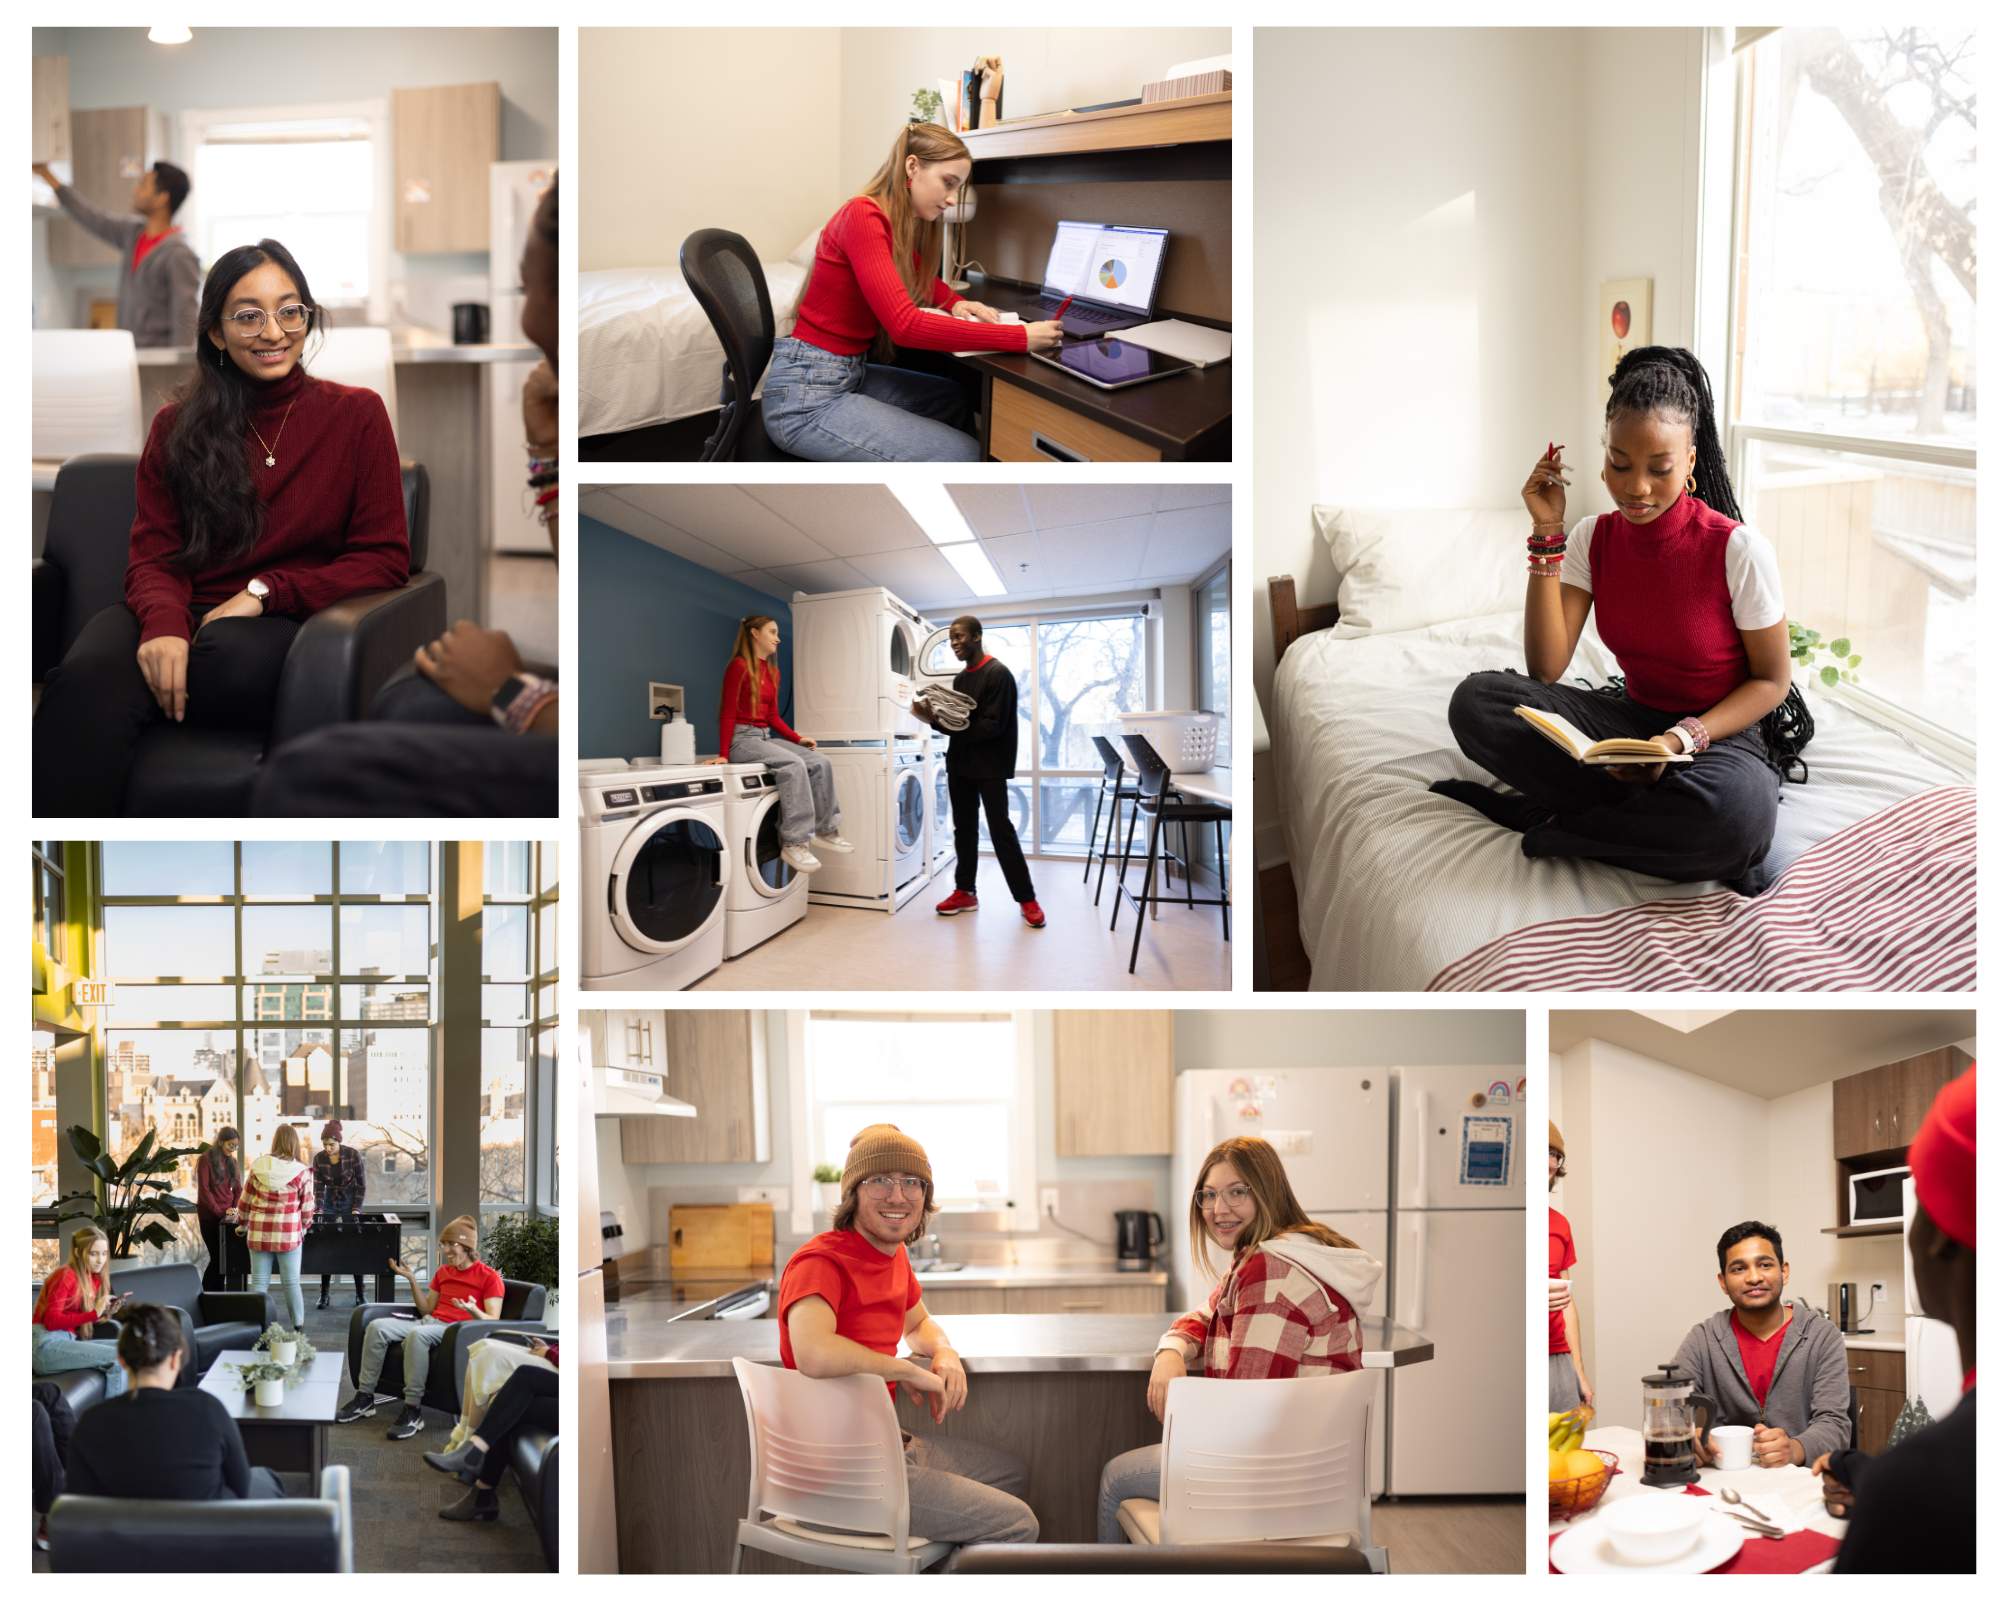 Collage of students living in residence